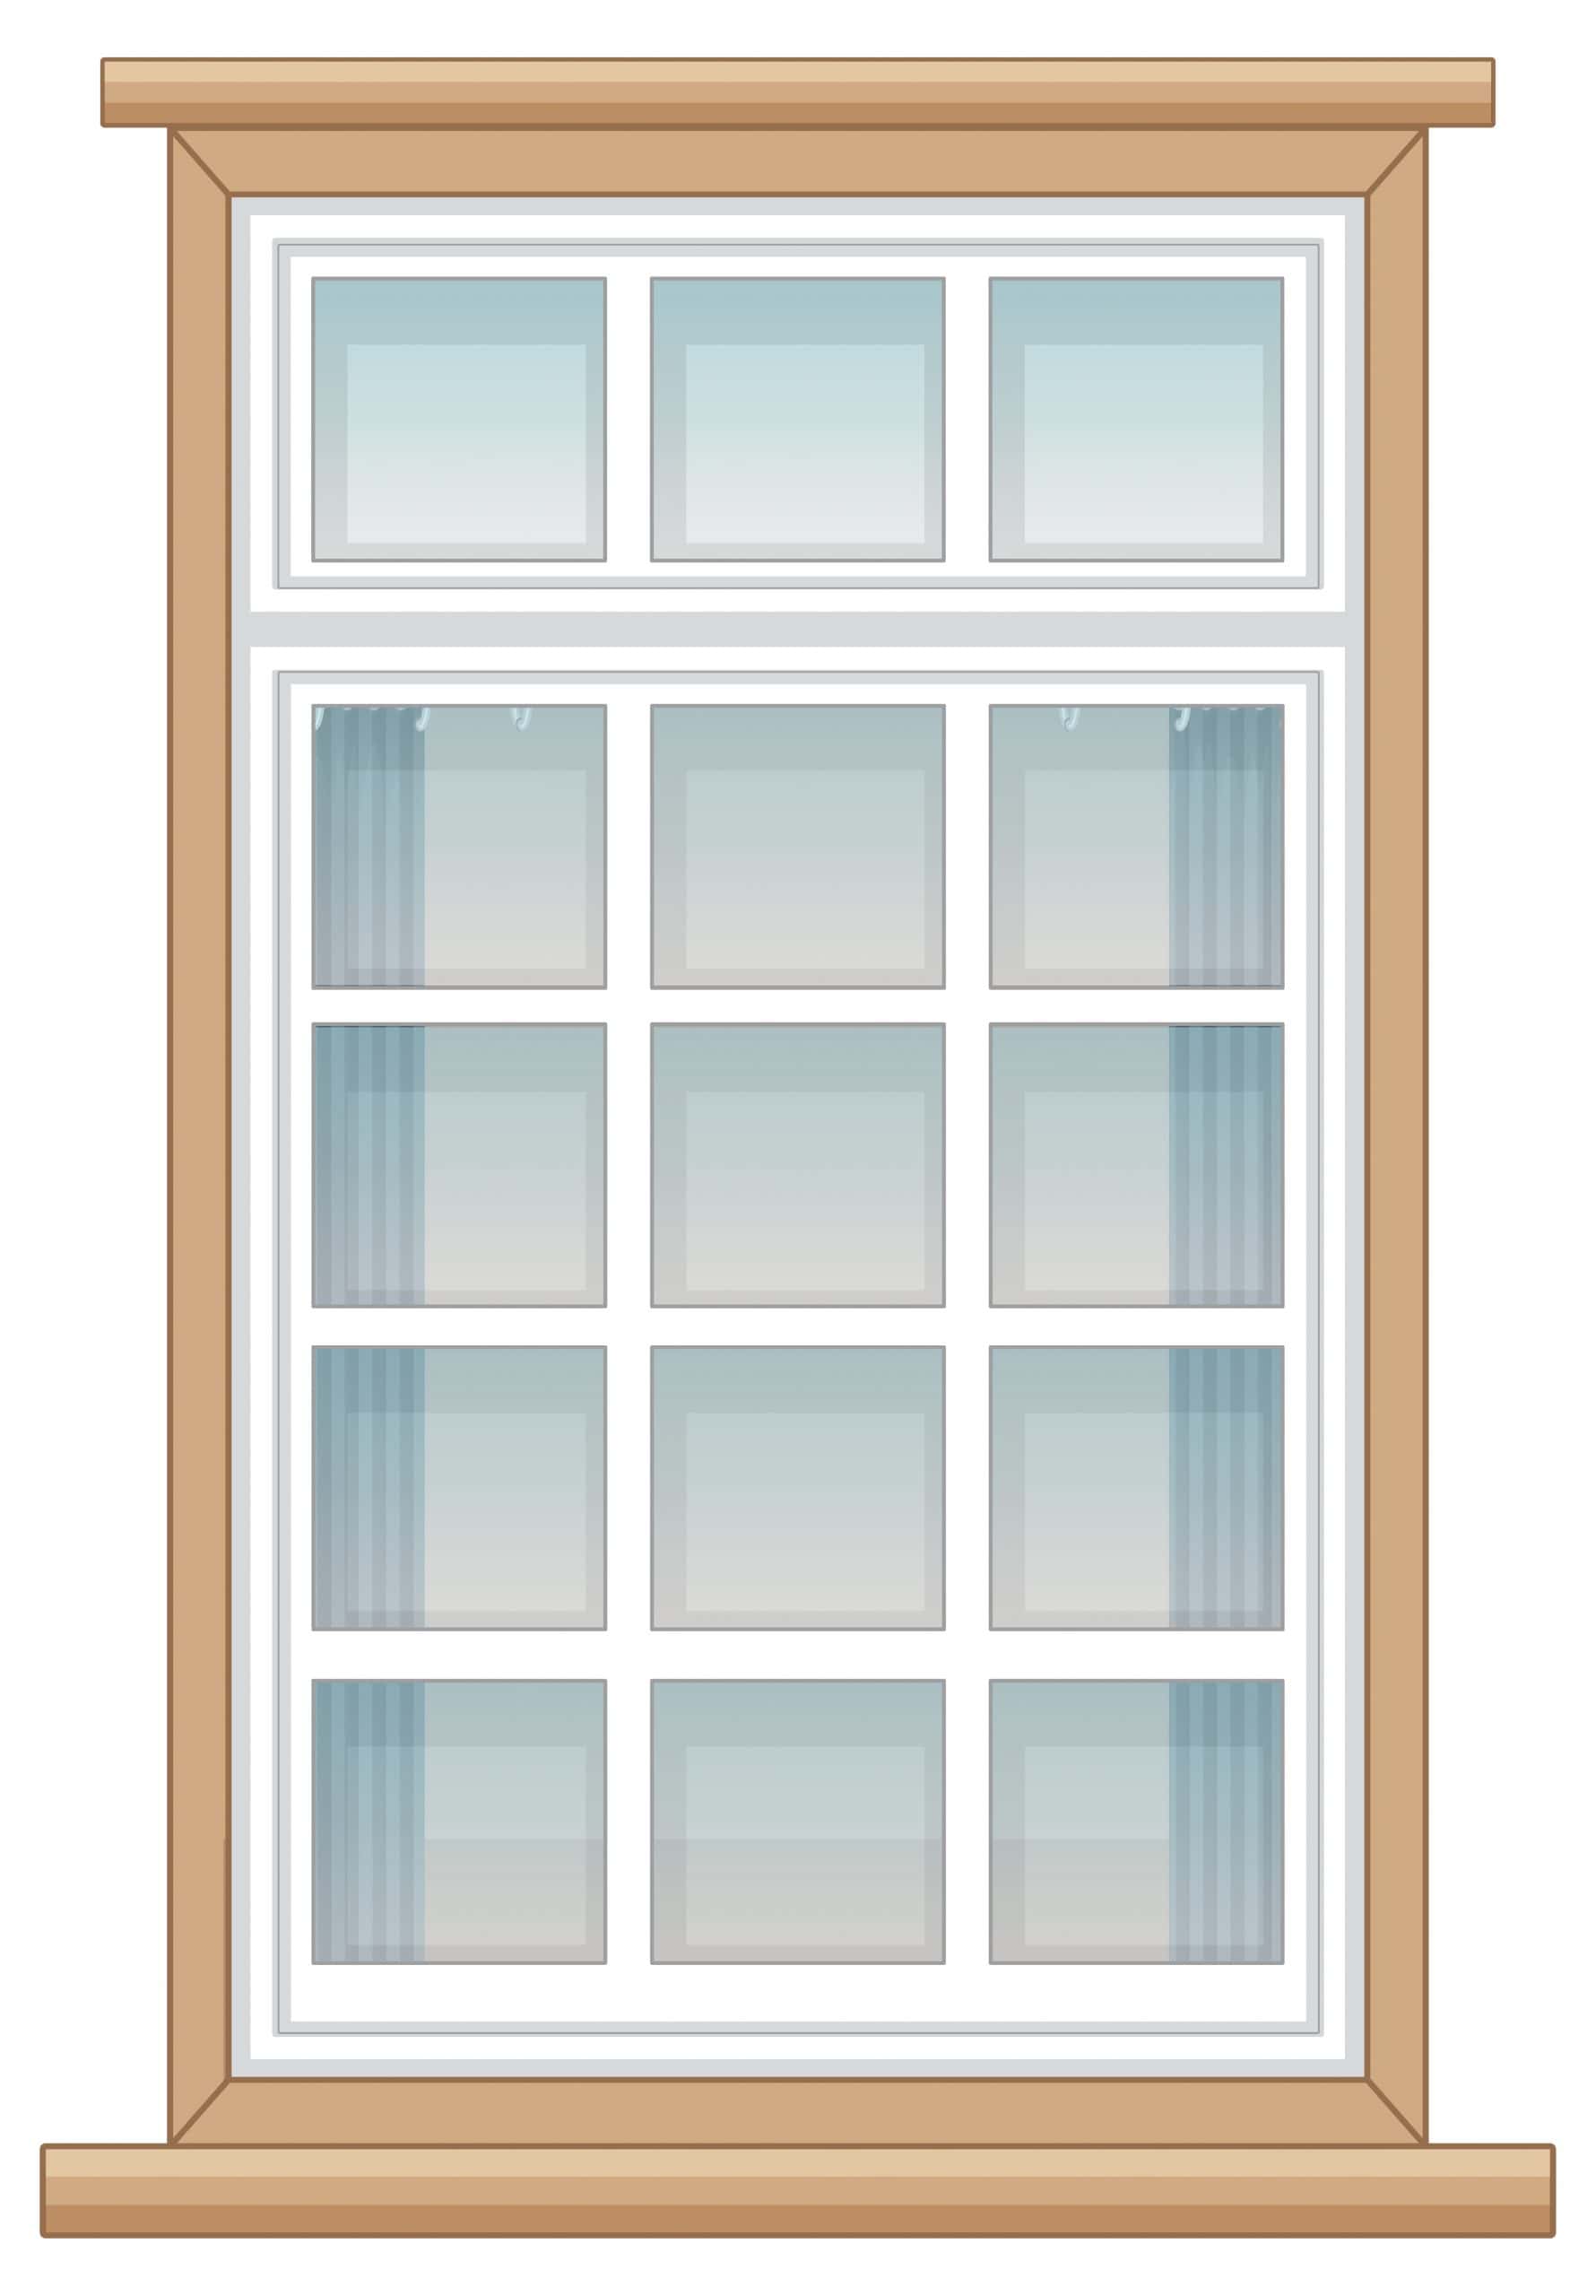 Latest Windows Designs For Your Home